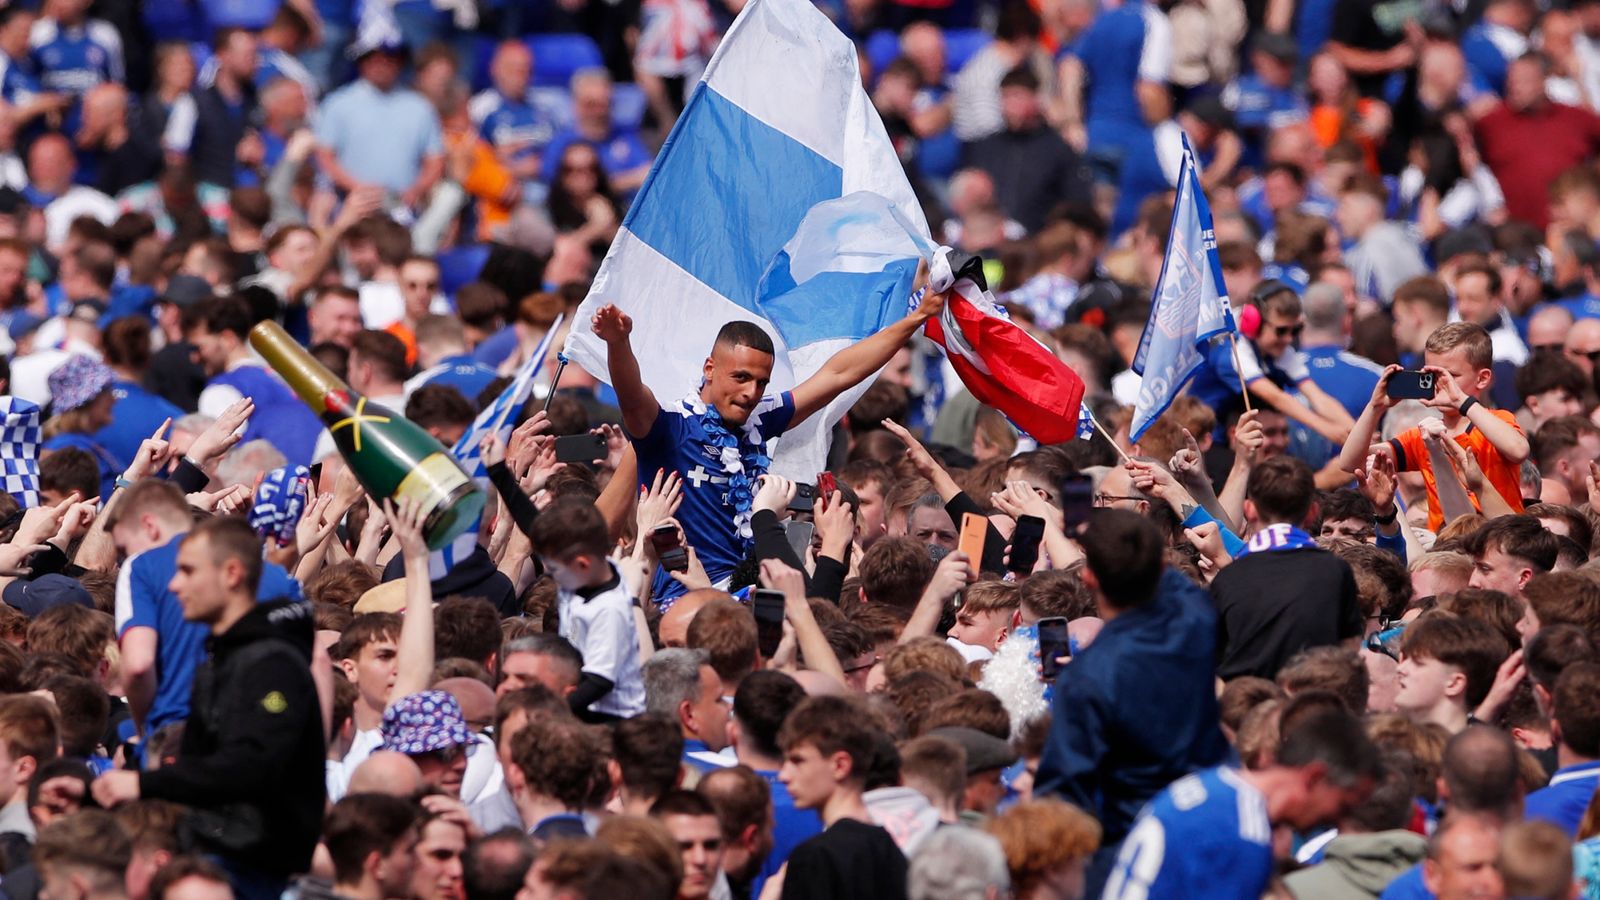 Ipswich Town promoted to the Premier League after 